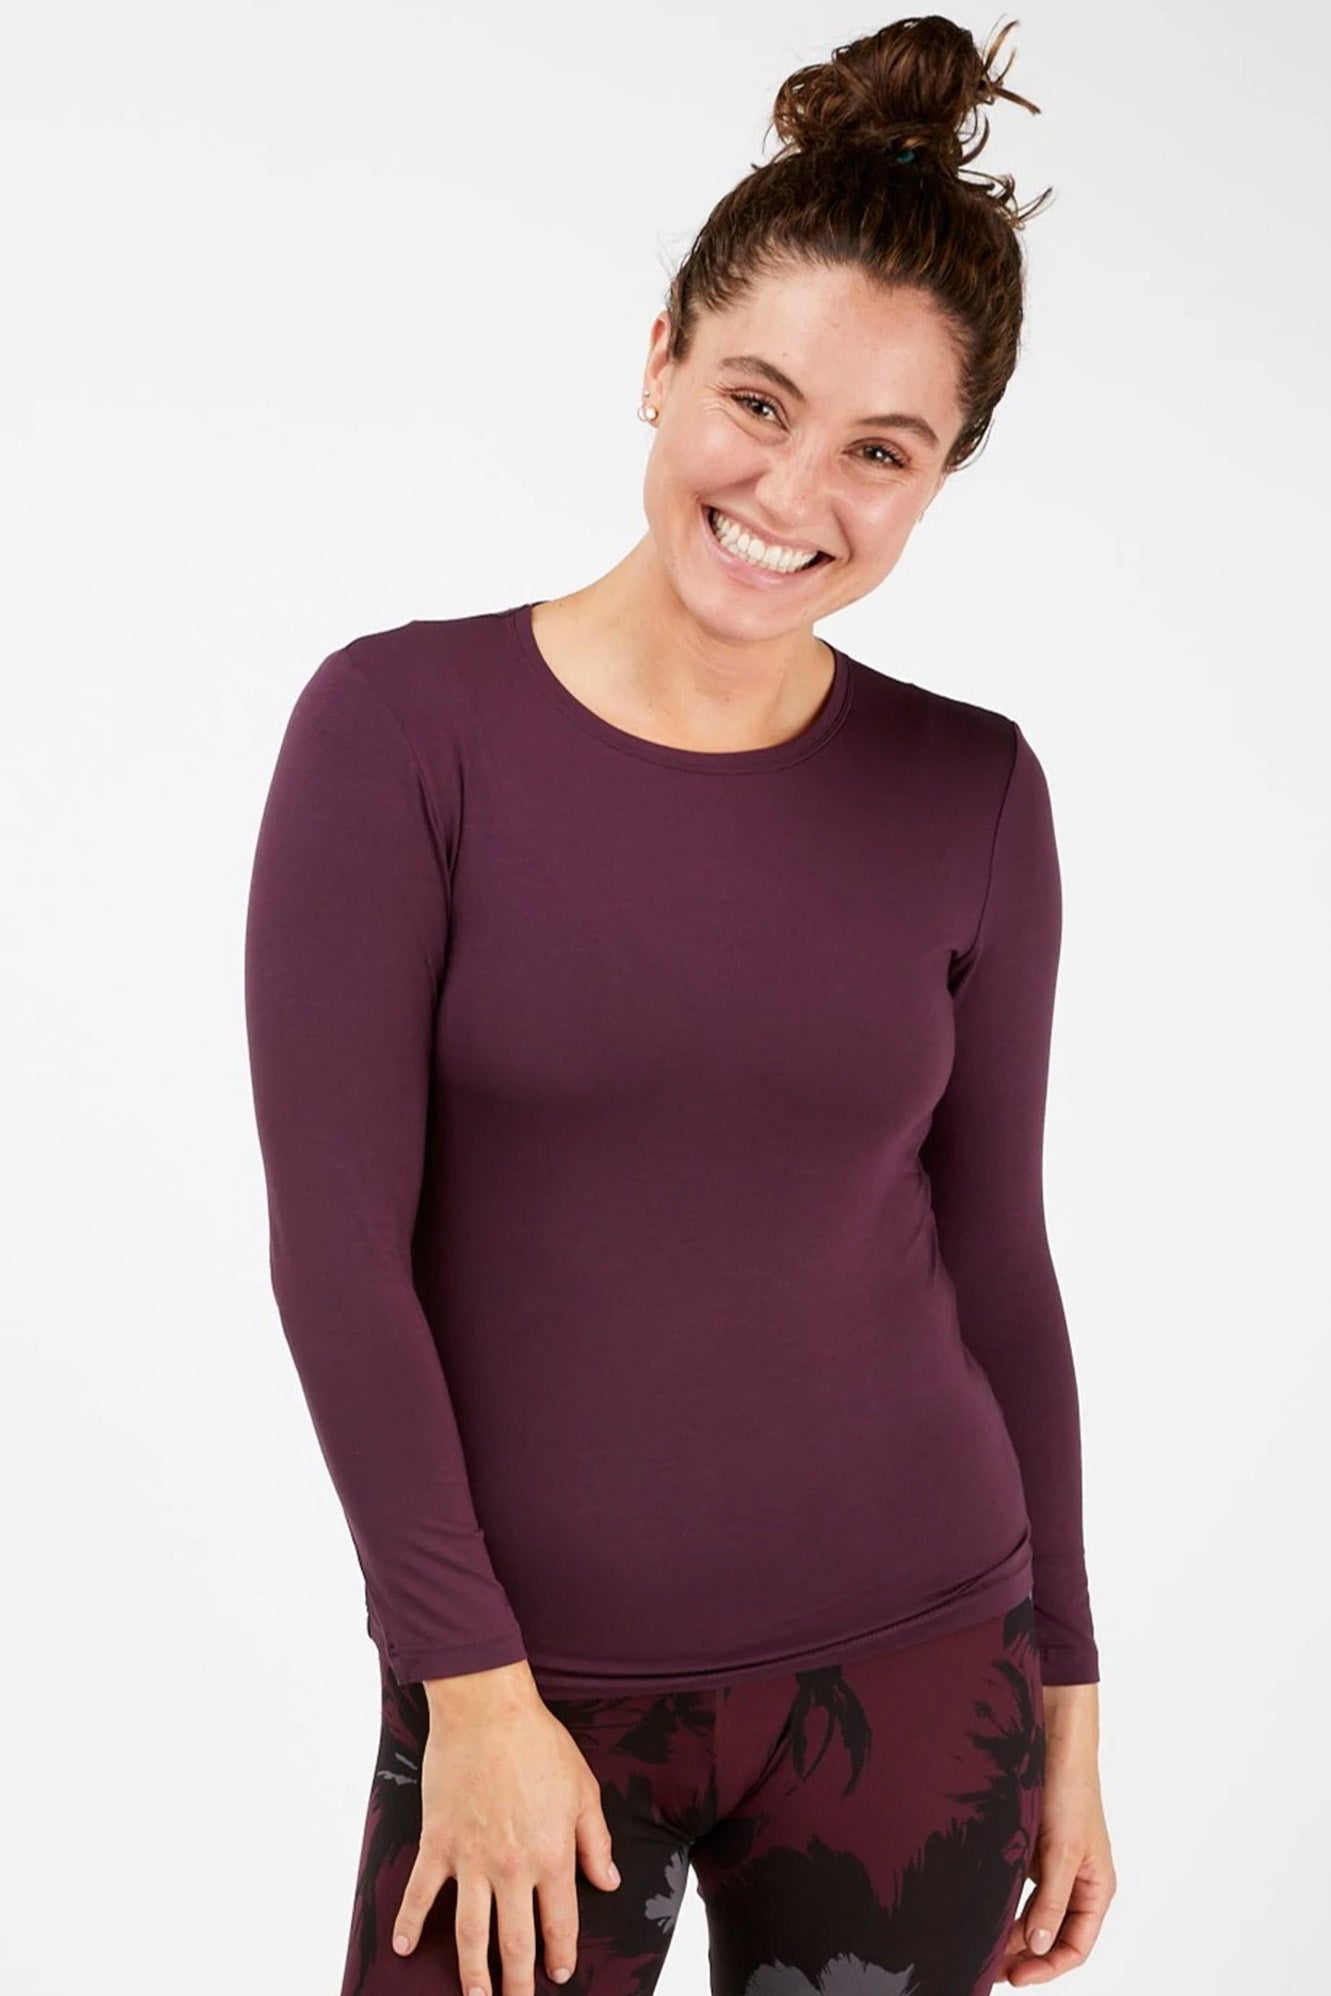 Young woman wearing Tani 79276 High Neck Long Sleeve in Wine Tasting